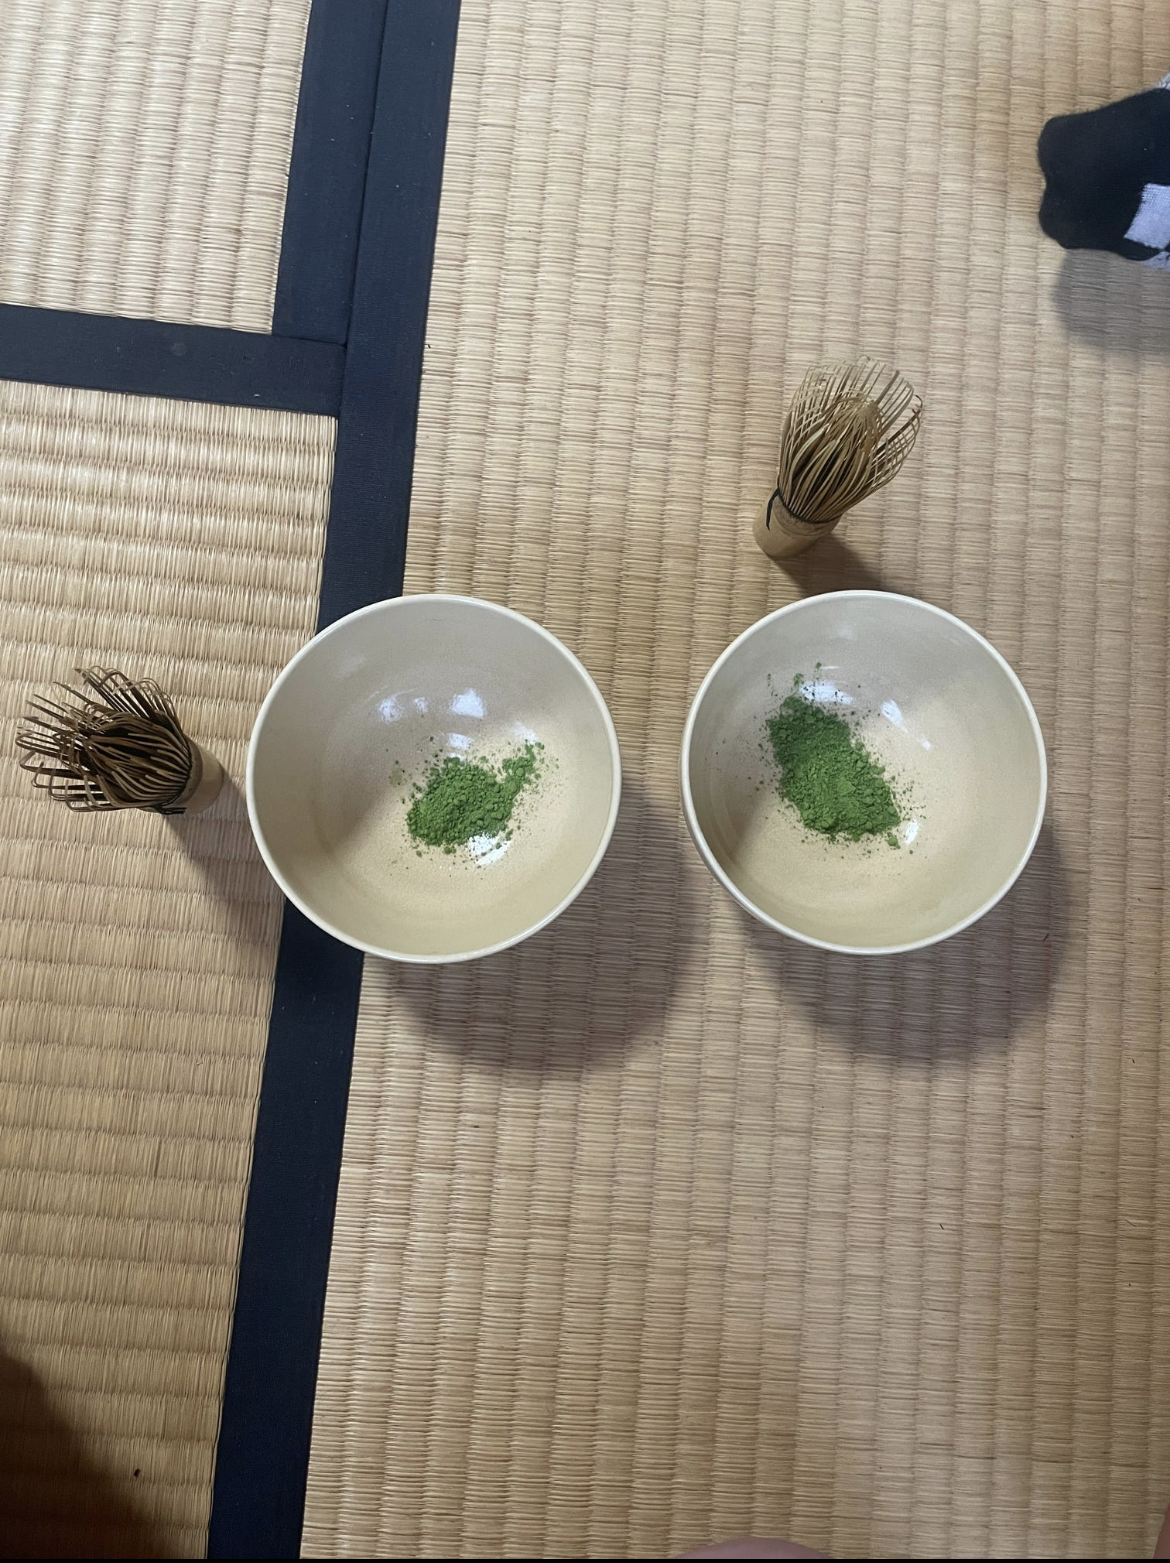 Tea cups of matcha and bamboo whisks to blend the matcha with water